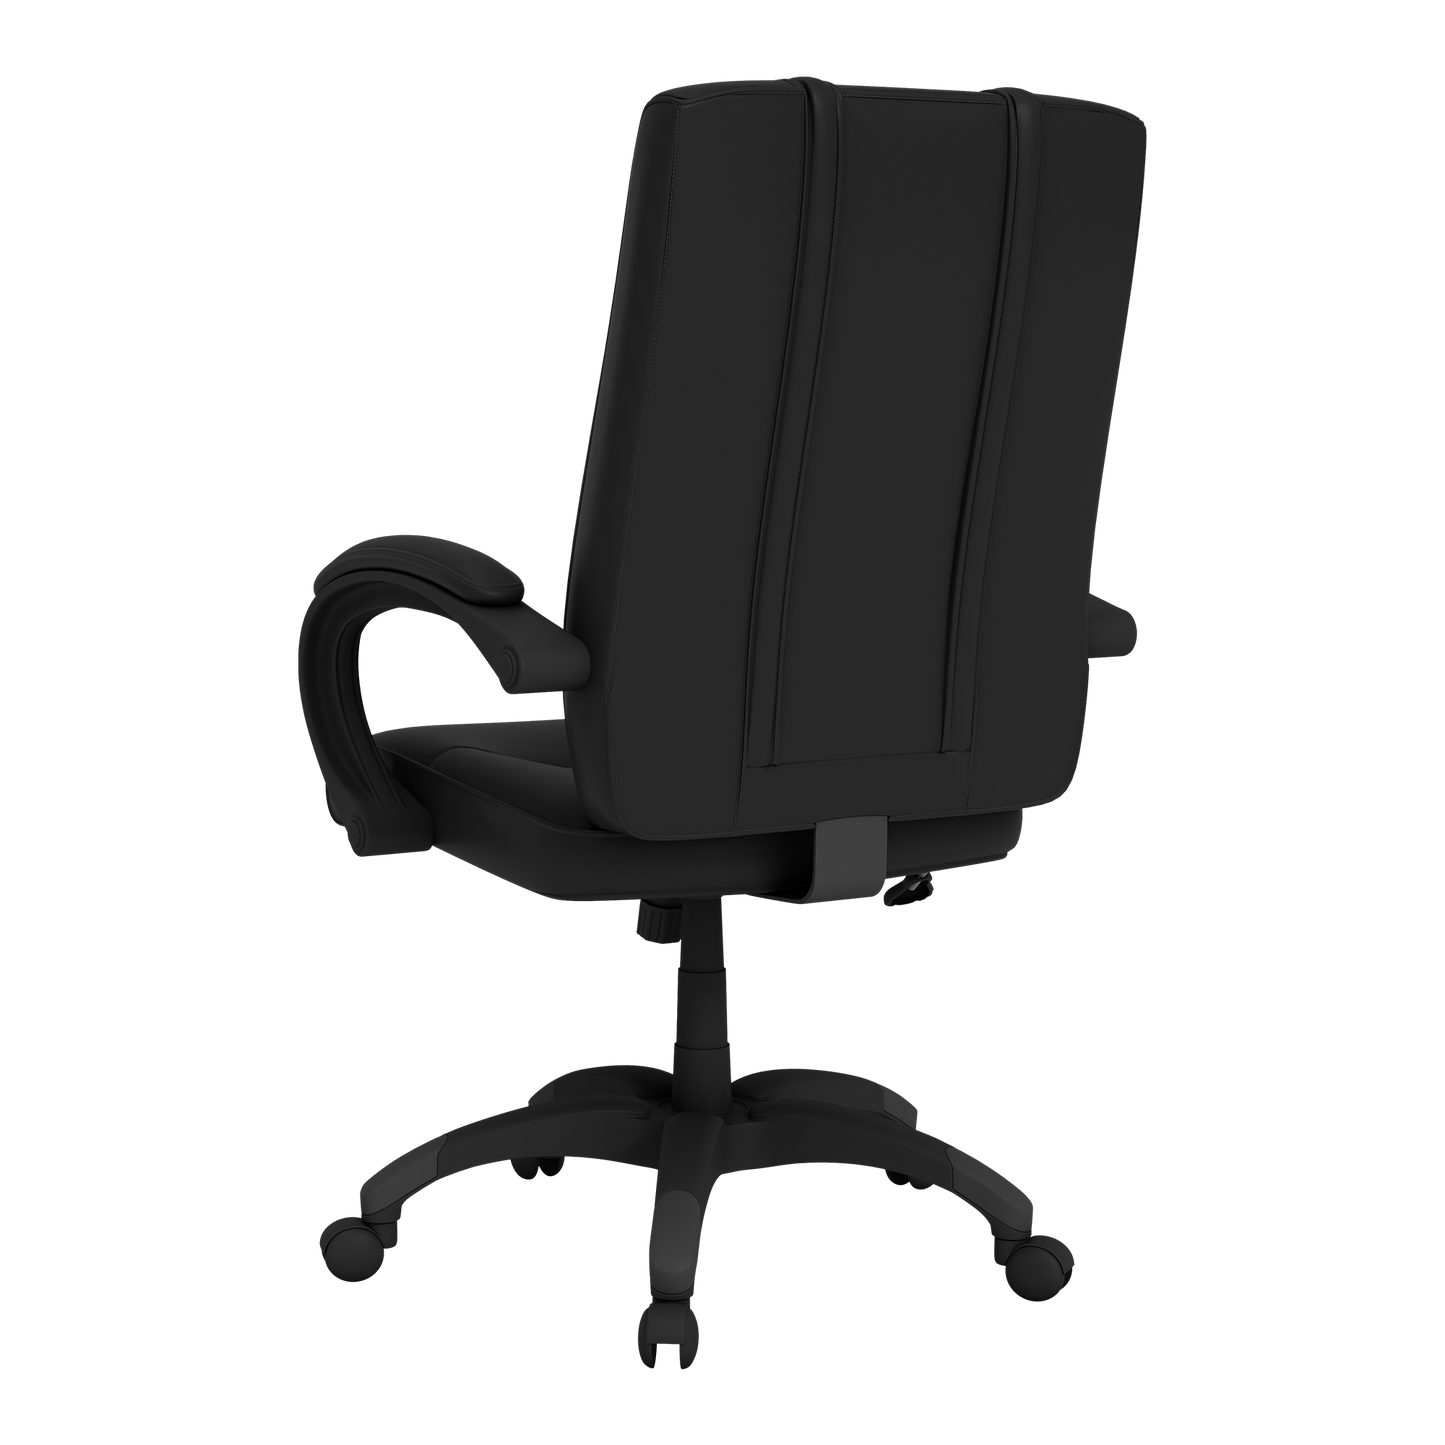 Office Chair 1000 with Iowa State Cyclones Logo